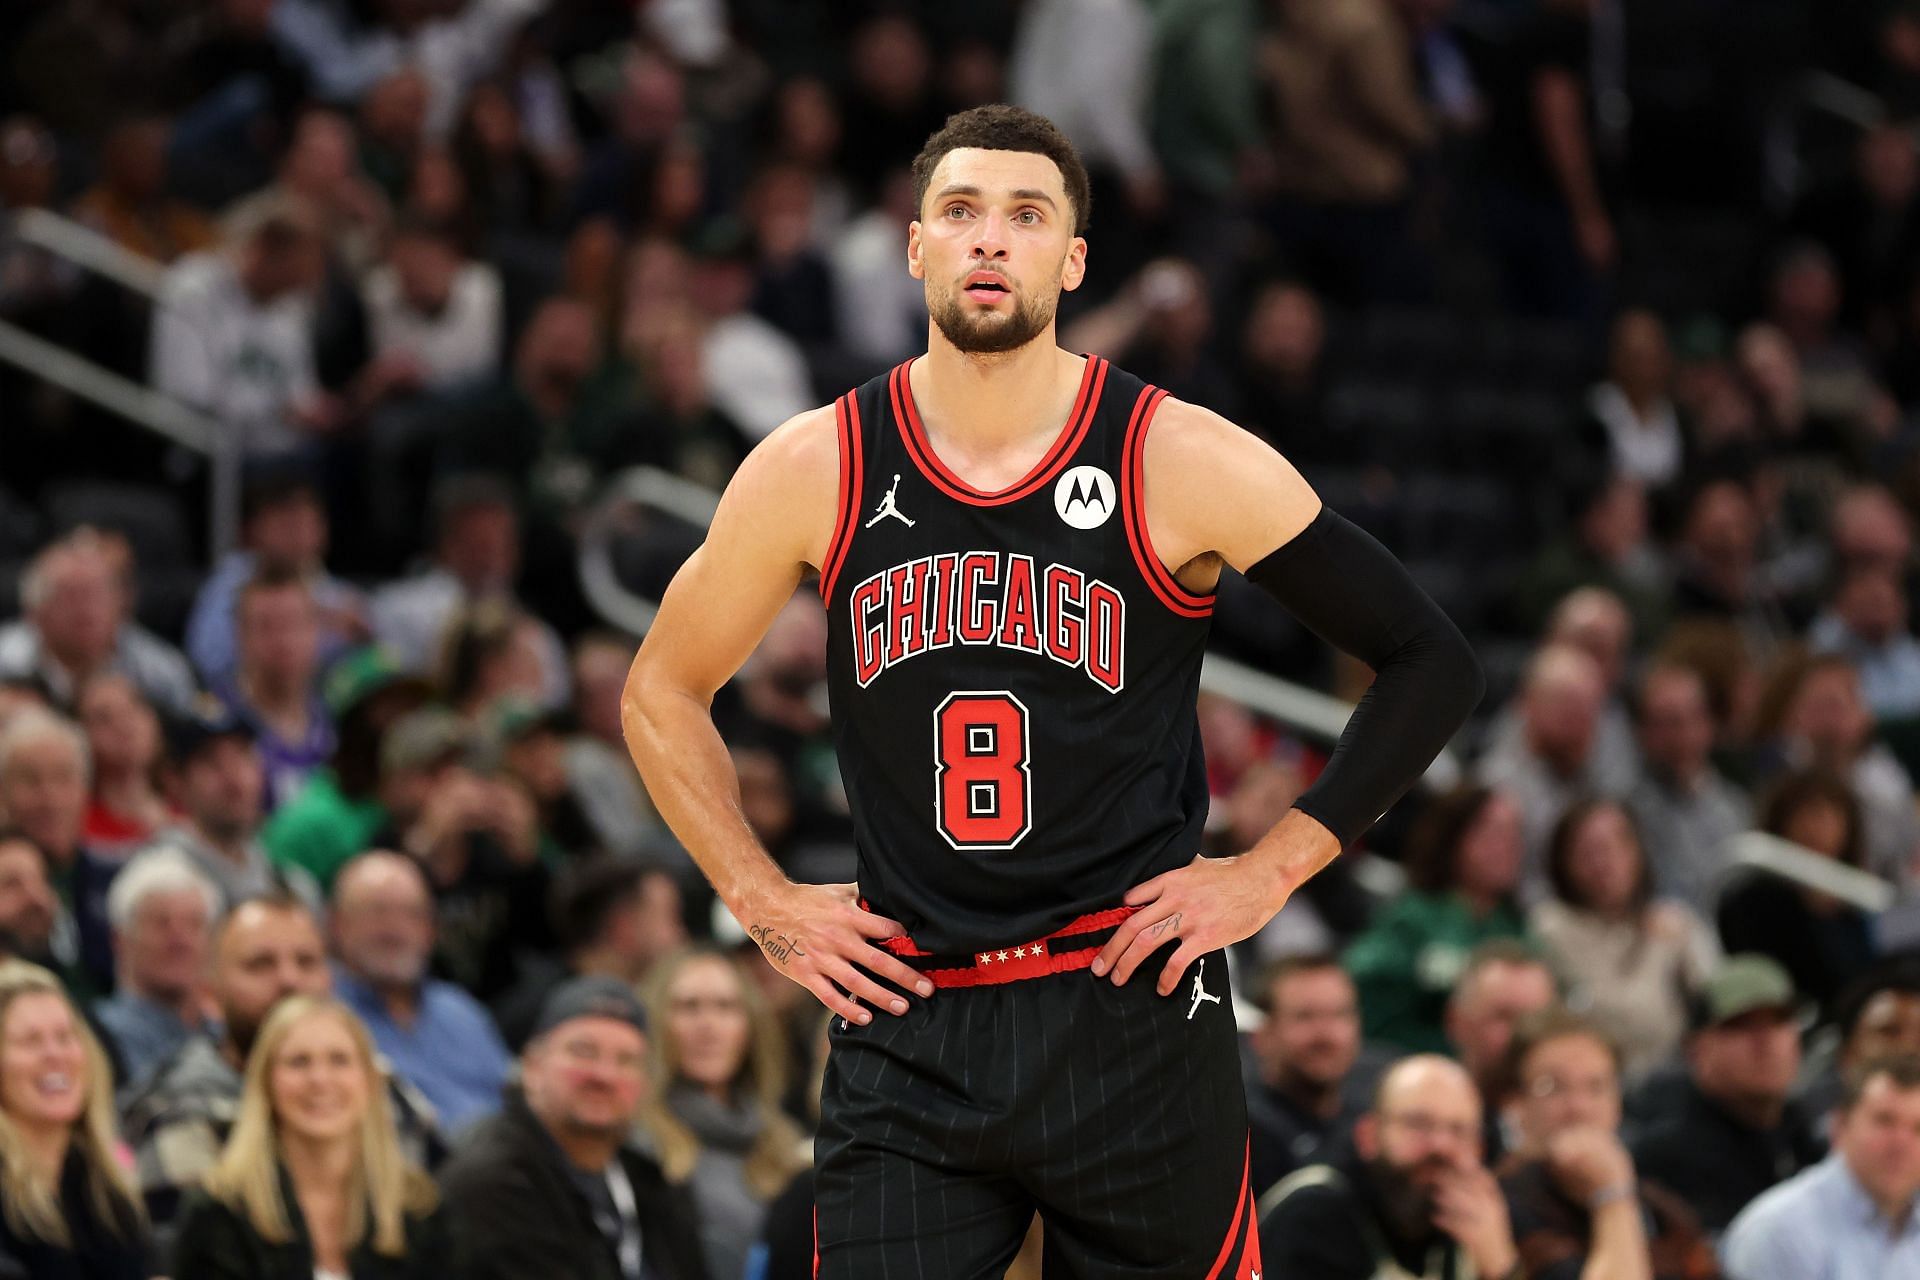 Zach LaVine is set to miss the rest of the season due to injury